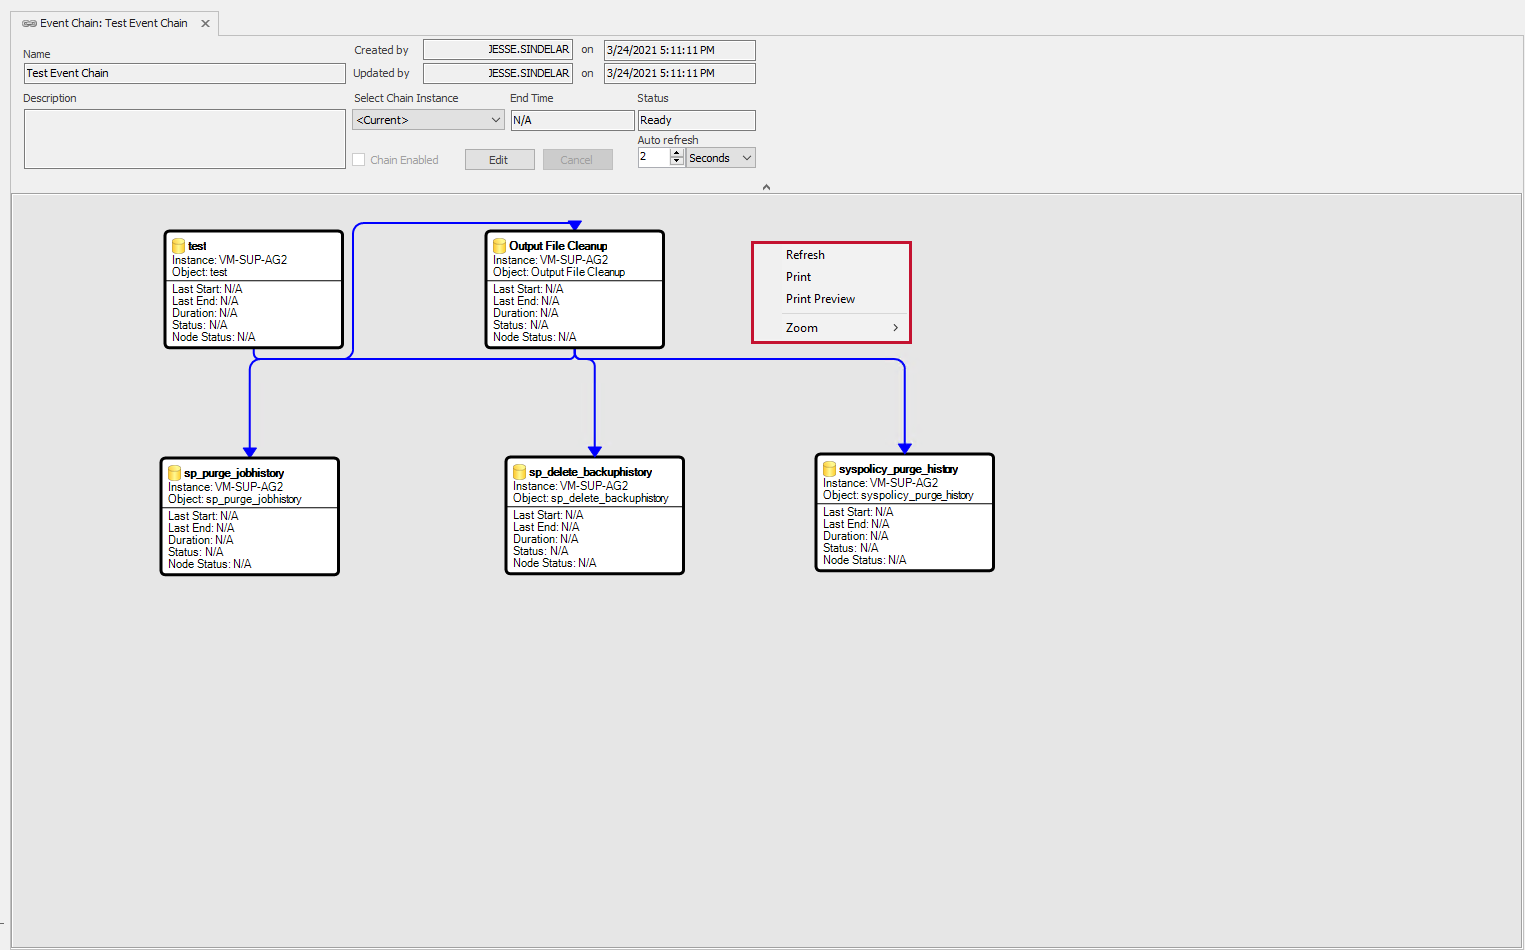 Event Chain tab displaying 5 events with connected workflows, and the workspace context menu options highlighted.